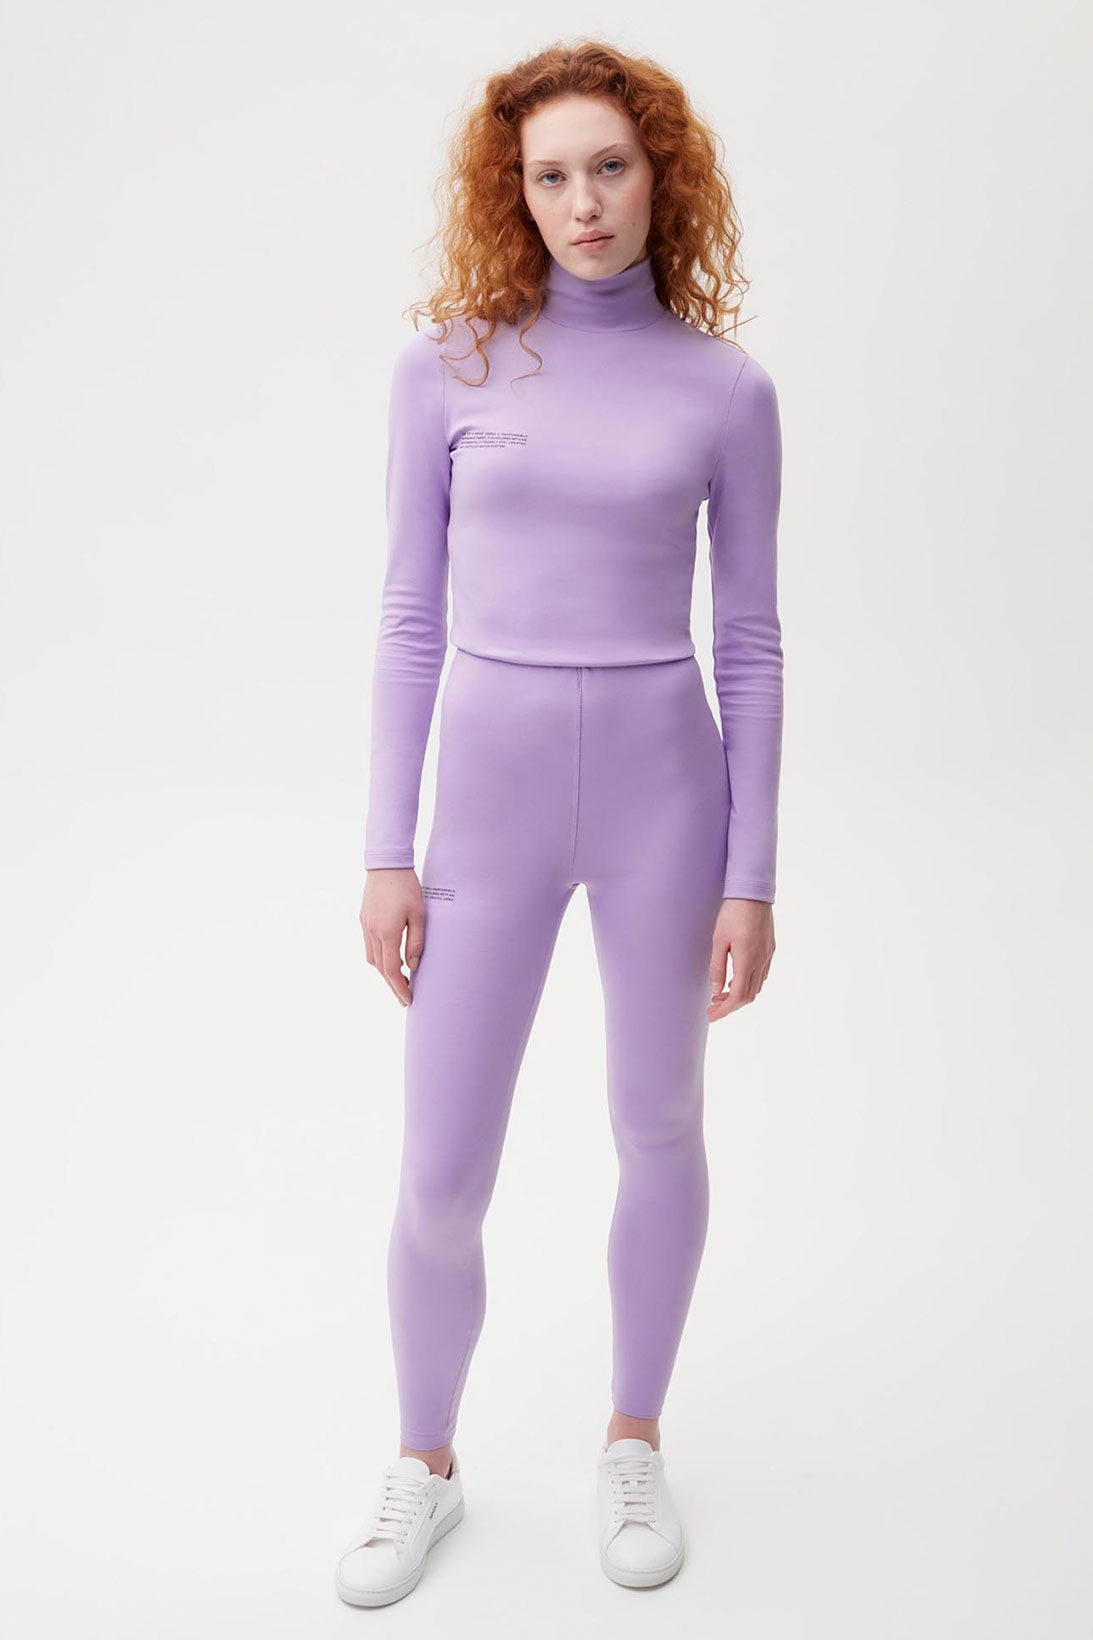 pangaia roica stretch athleisure sustainable collection turtleneck top leggings lilac purple